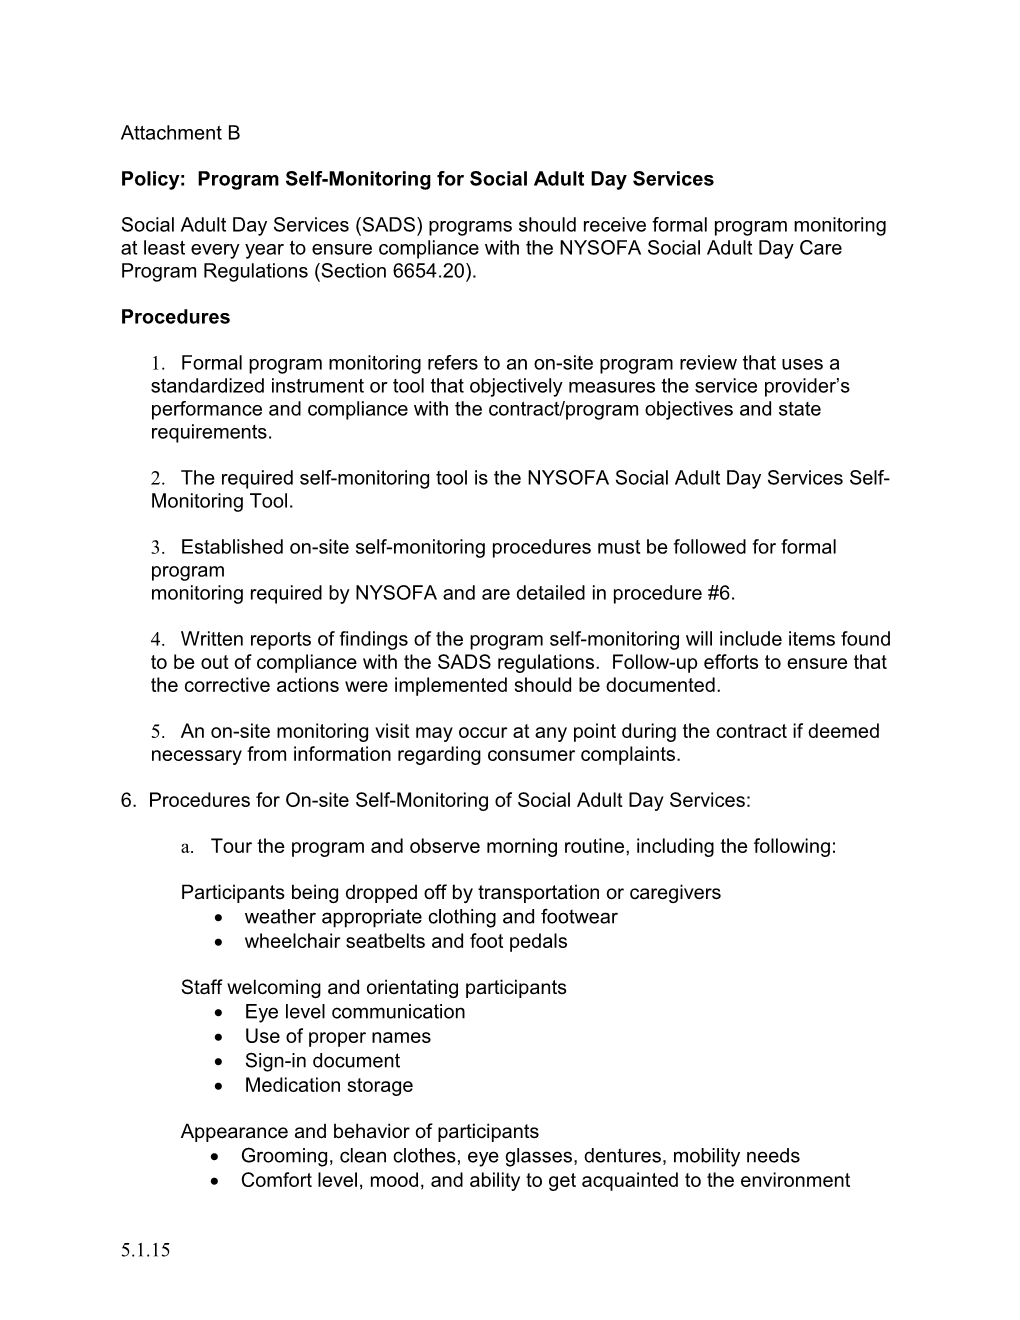 Policy: Program Self-Monitoring for Social Adult Day Services